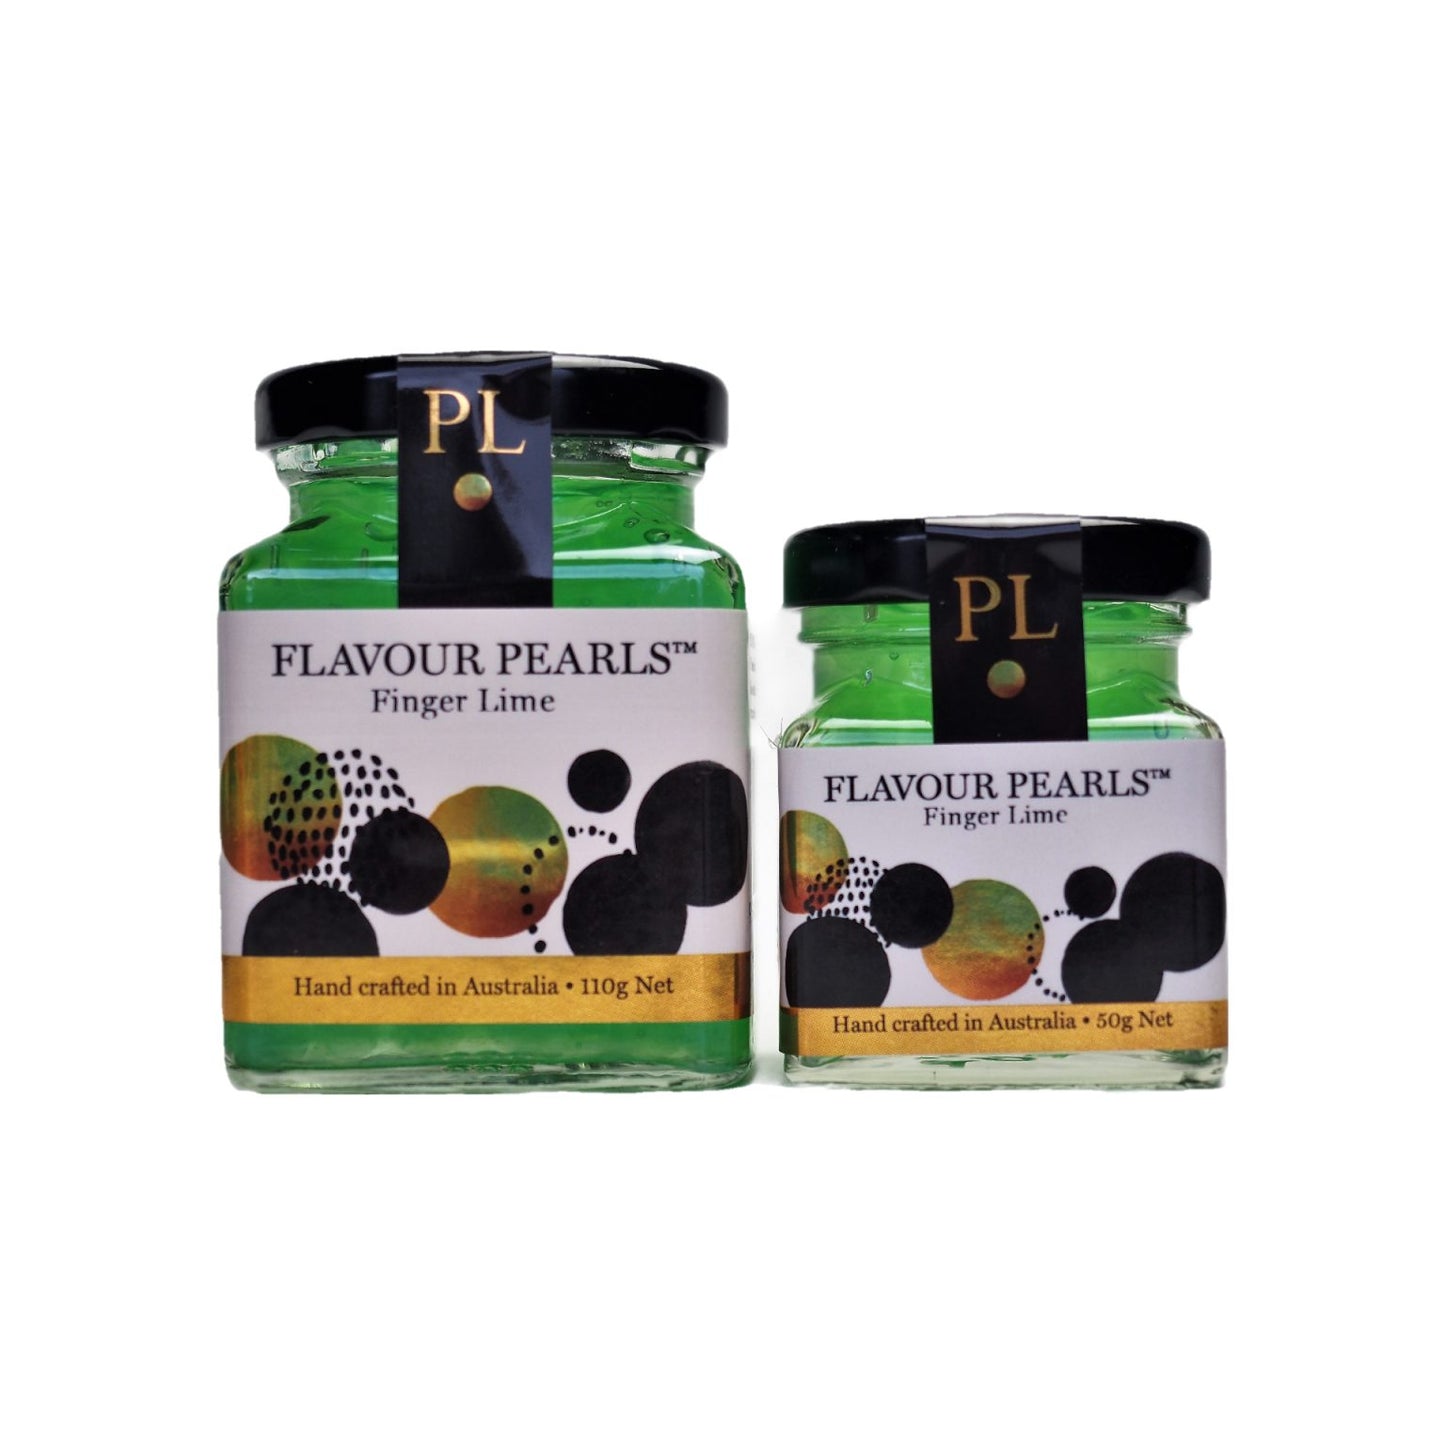 Native Finger Lime Flavour Pearls (300g)